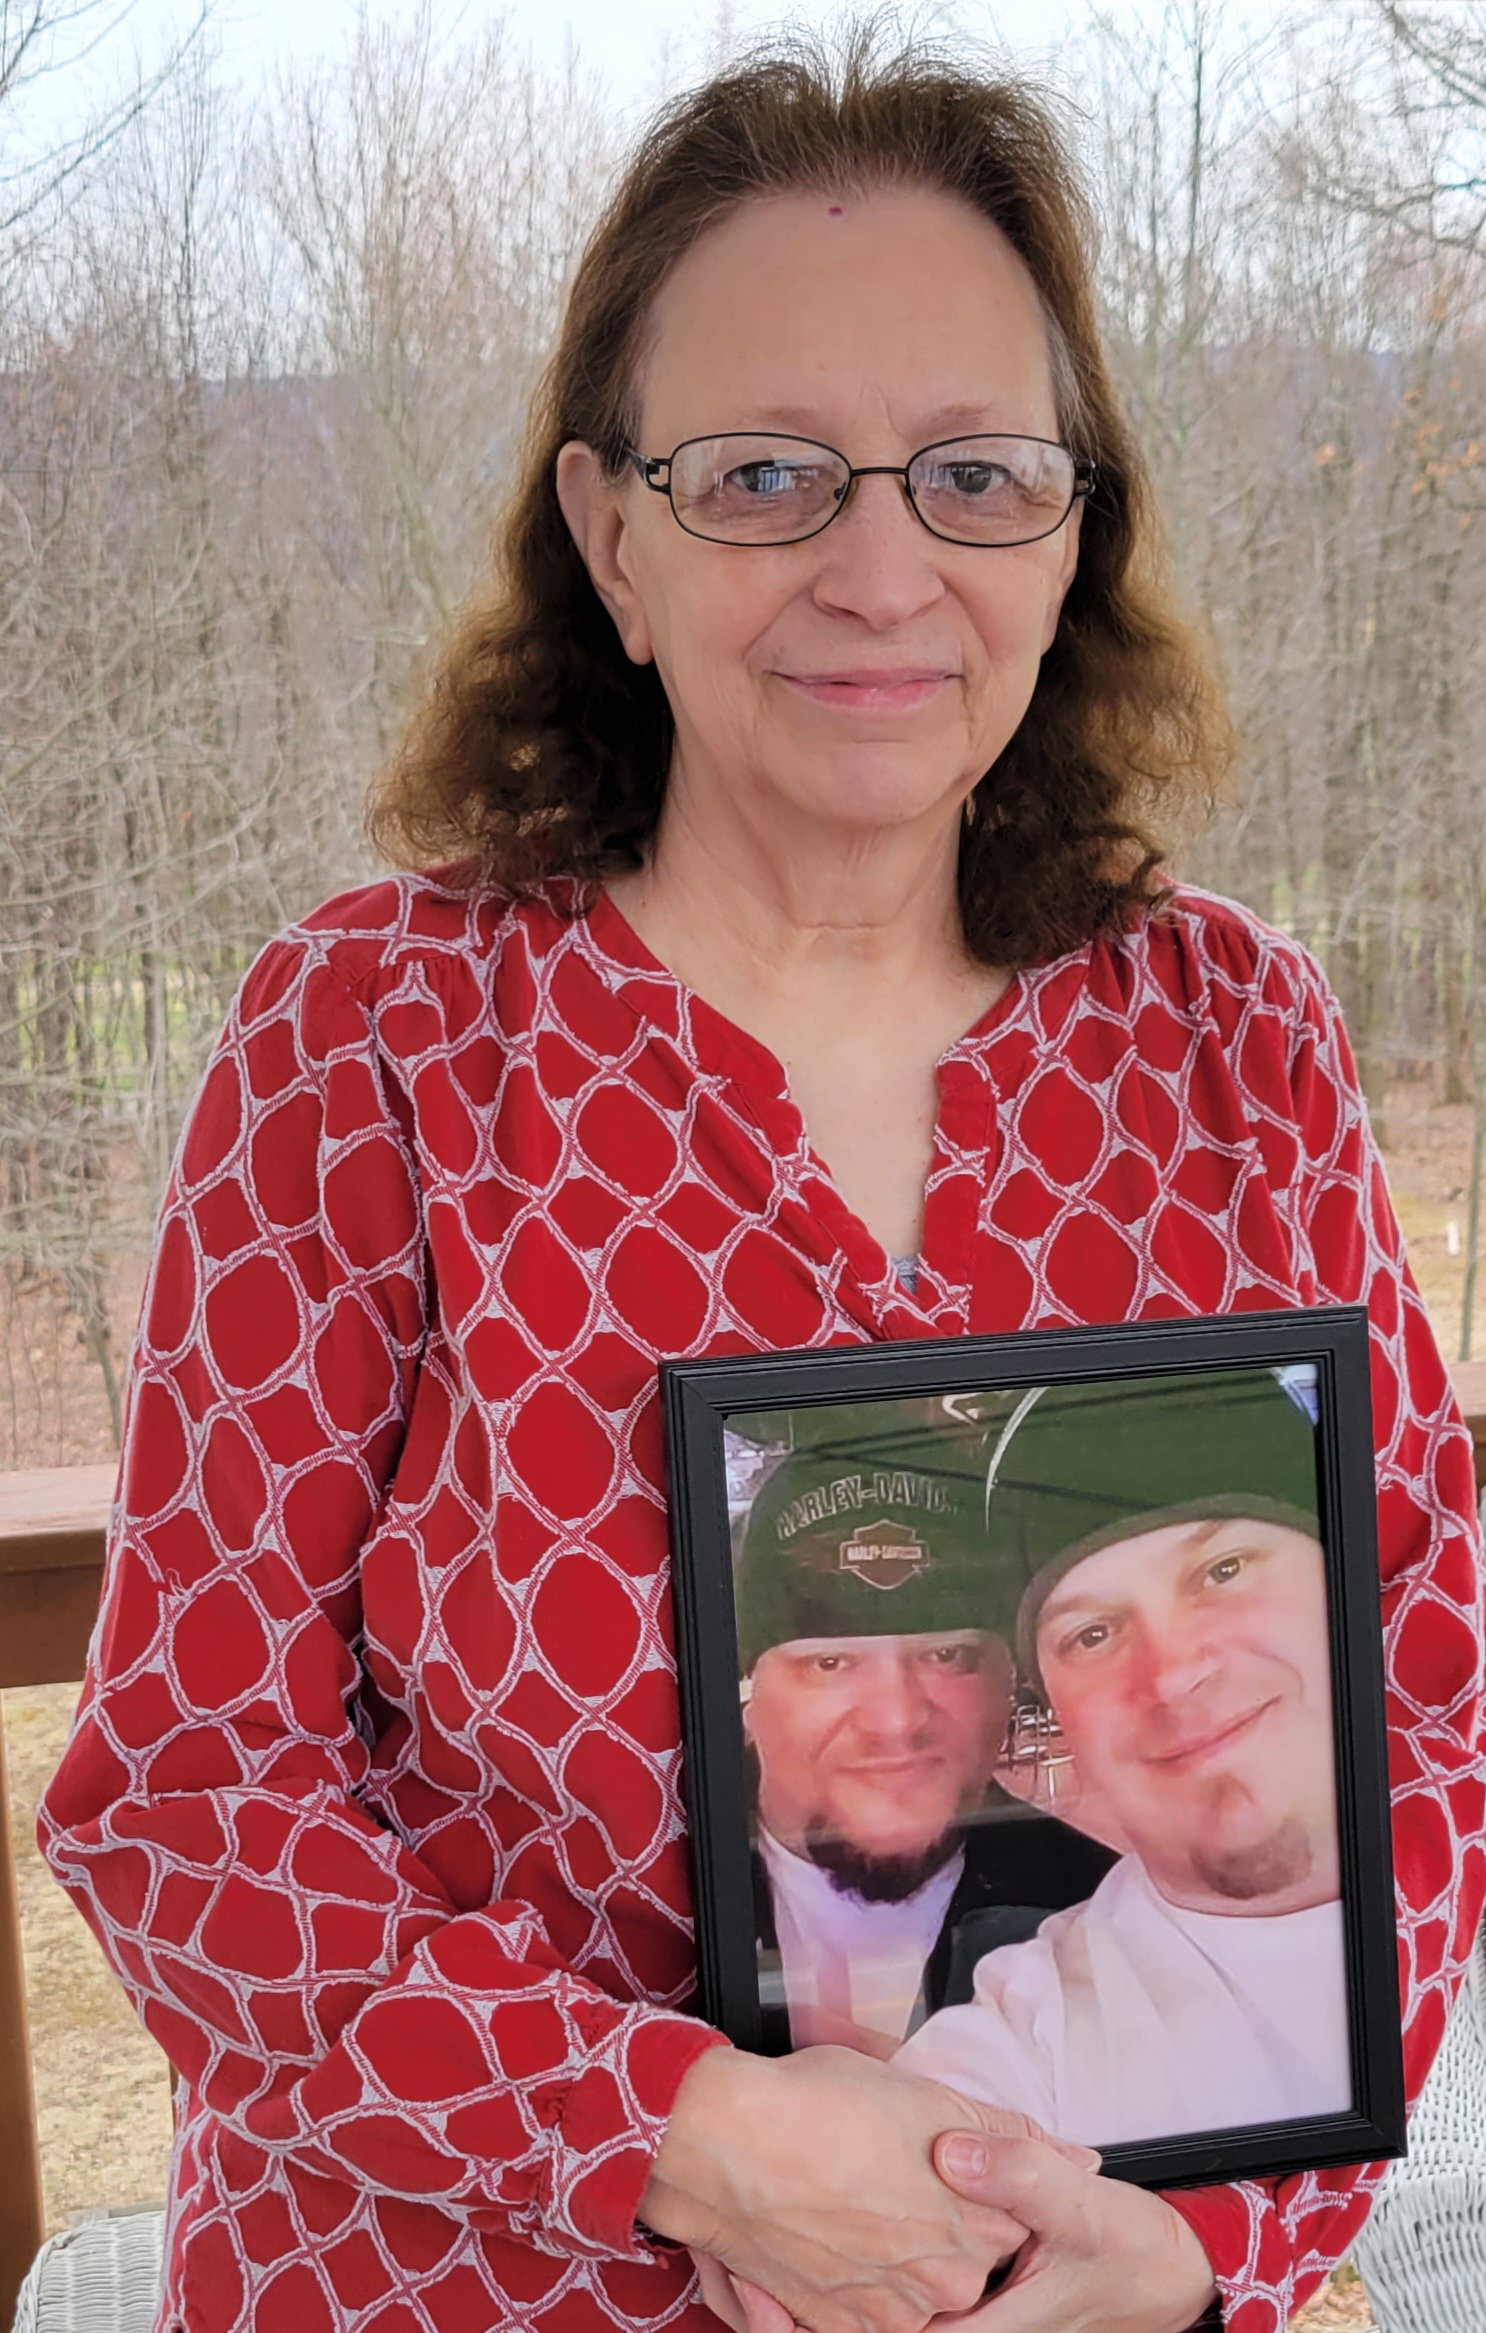 Connie Houtz was seen standing outside her home, holding a photograph of her sons Toby and Eric Delamarter.  In the photograph she is holding, the boys are standing there laughing.